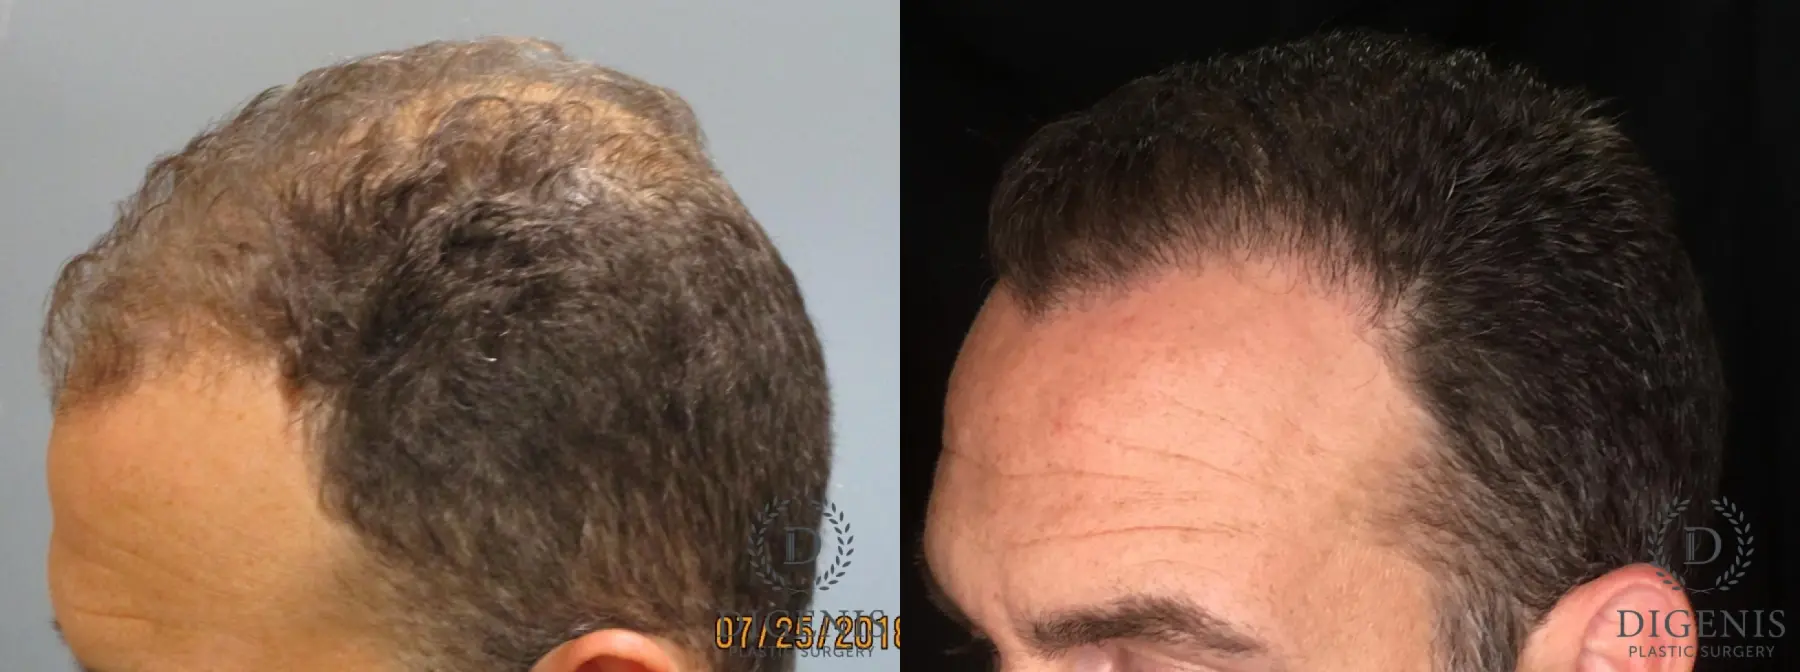 NeoGraft Hair Restoration: Patient 2 - Before and After  